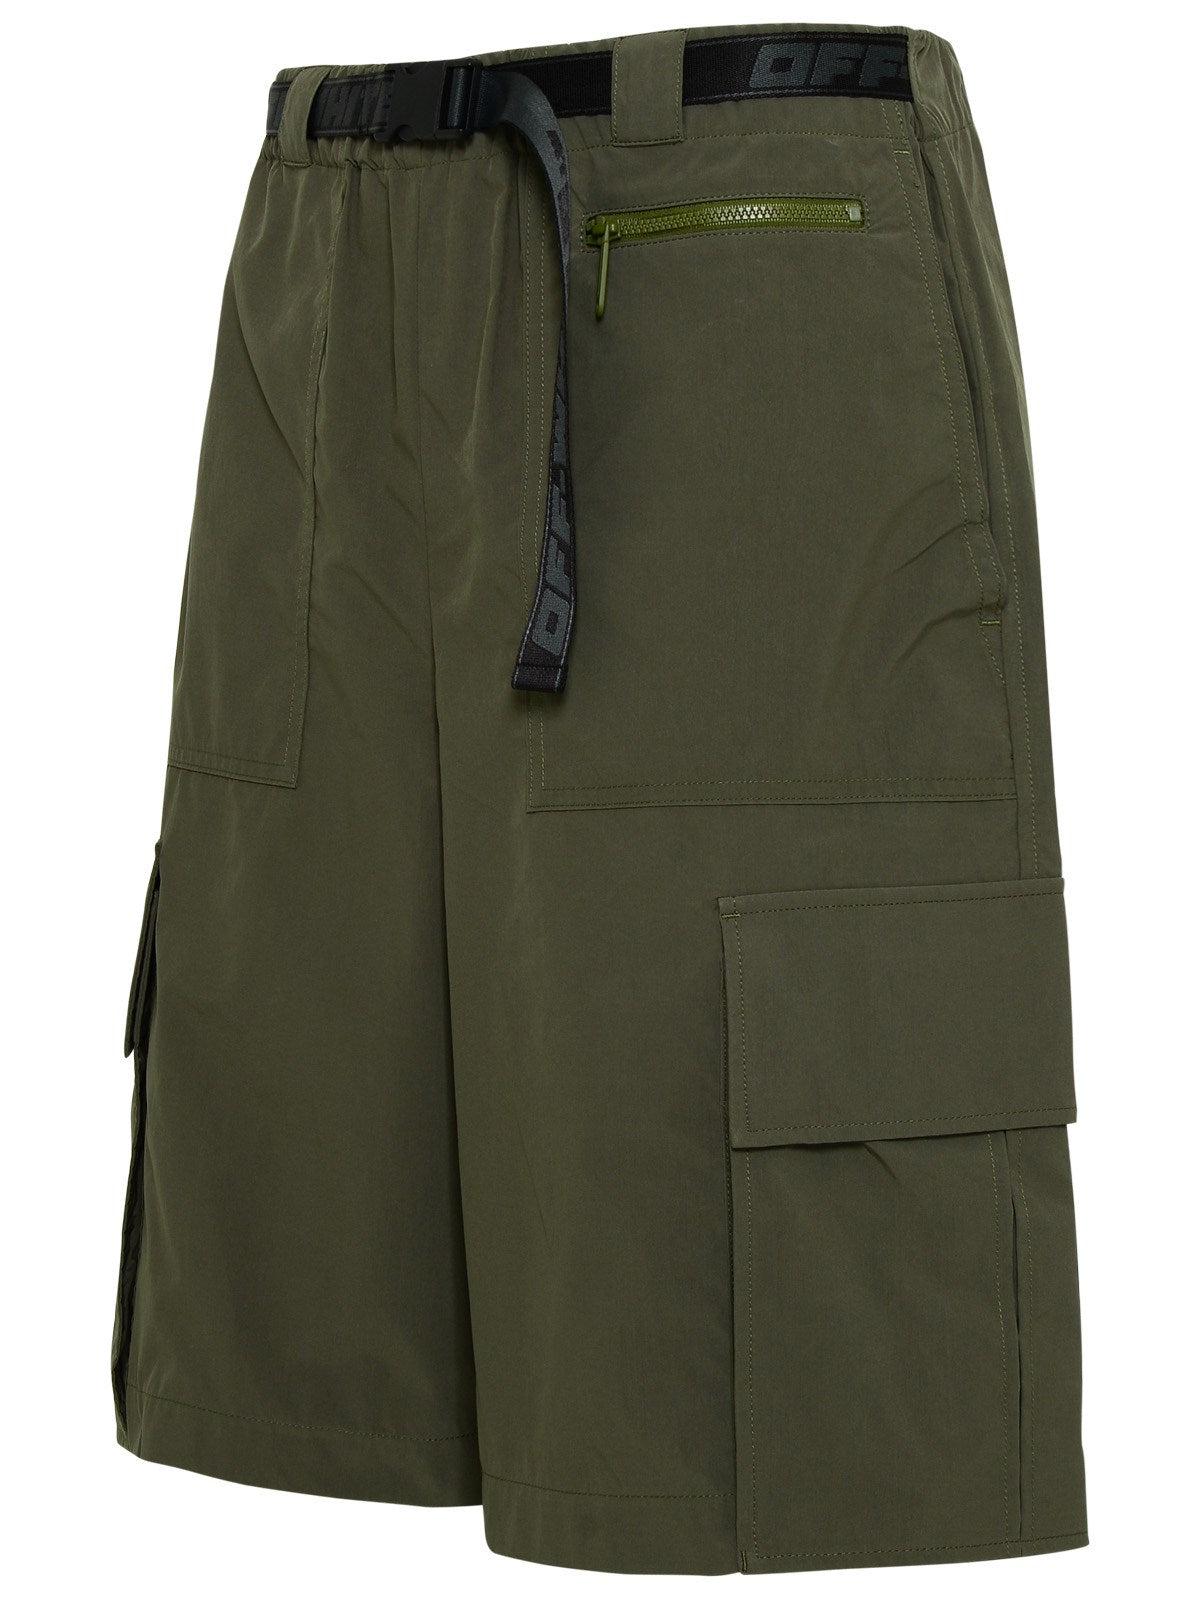 Green for Men Off-White c/o Virgil Abloh Industrial Cargo Shorts in Army Green Mens Clothing Shorts Cargo shorts 